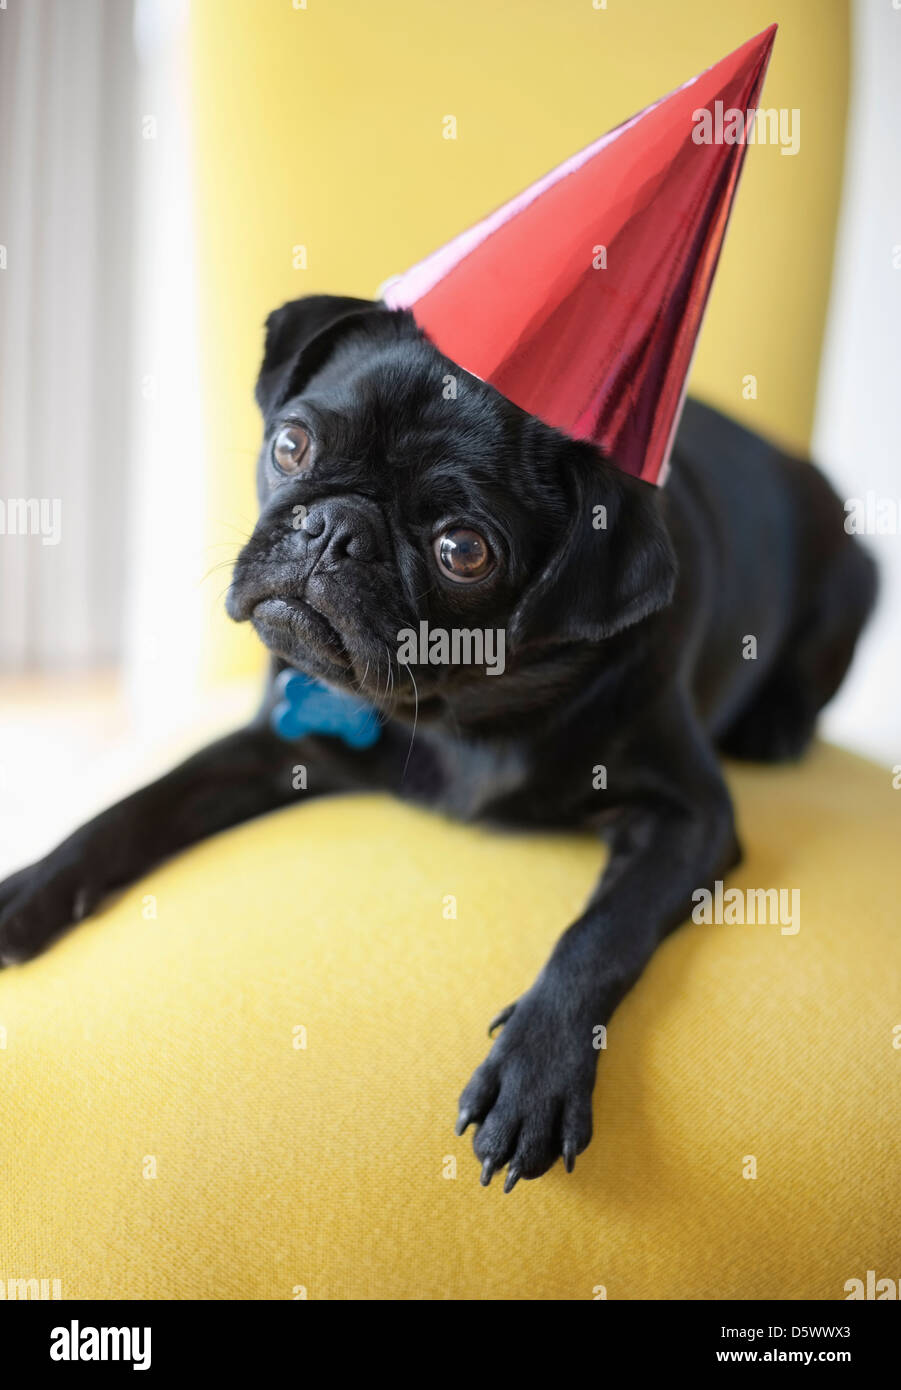 Dog wearing party hat on chair Banque D'Images